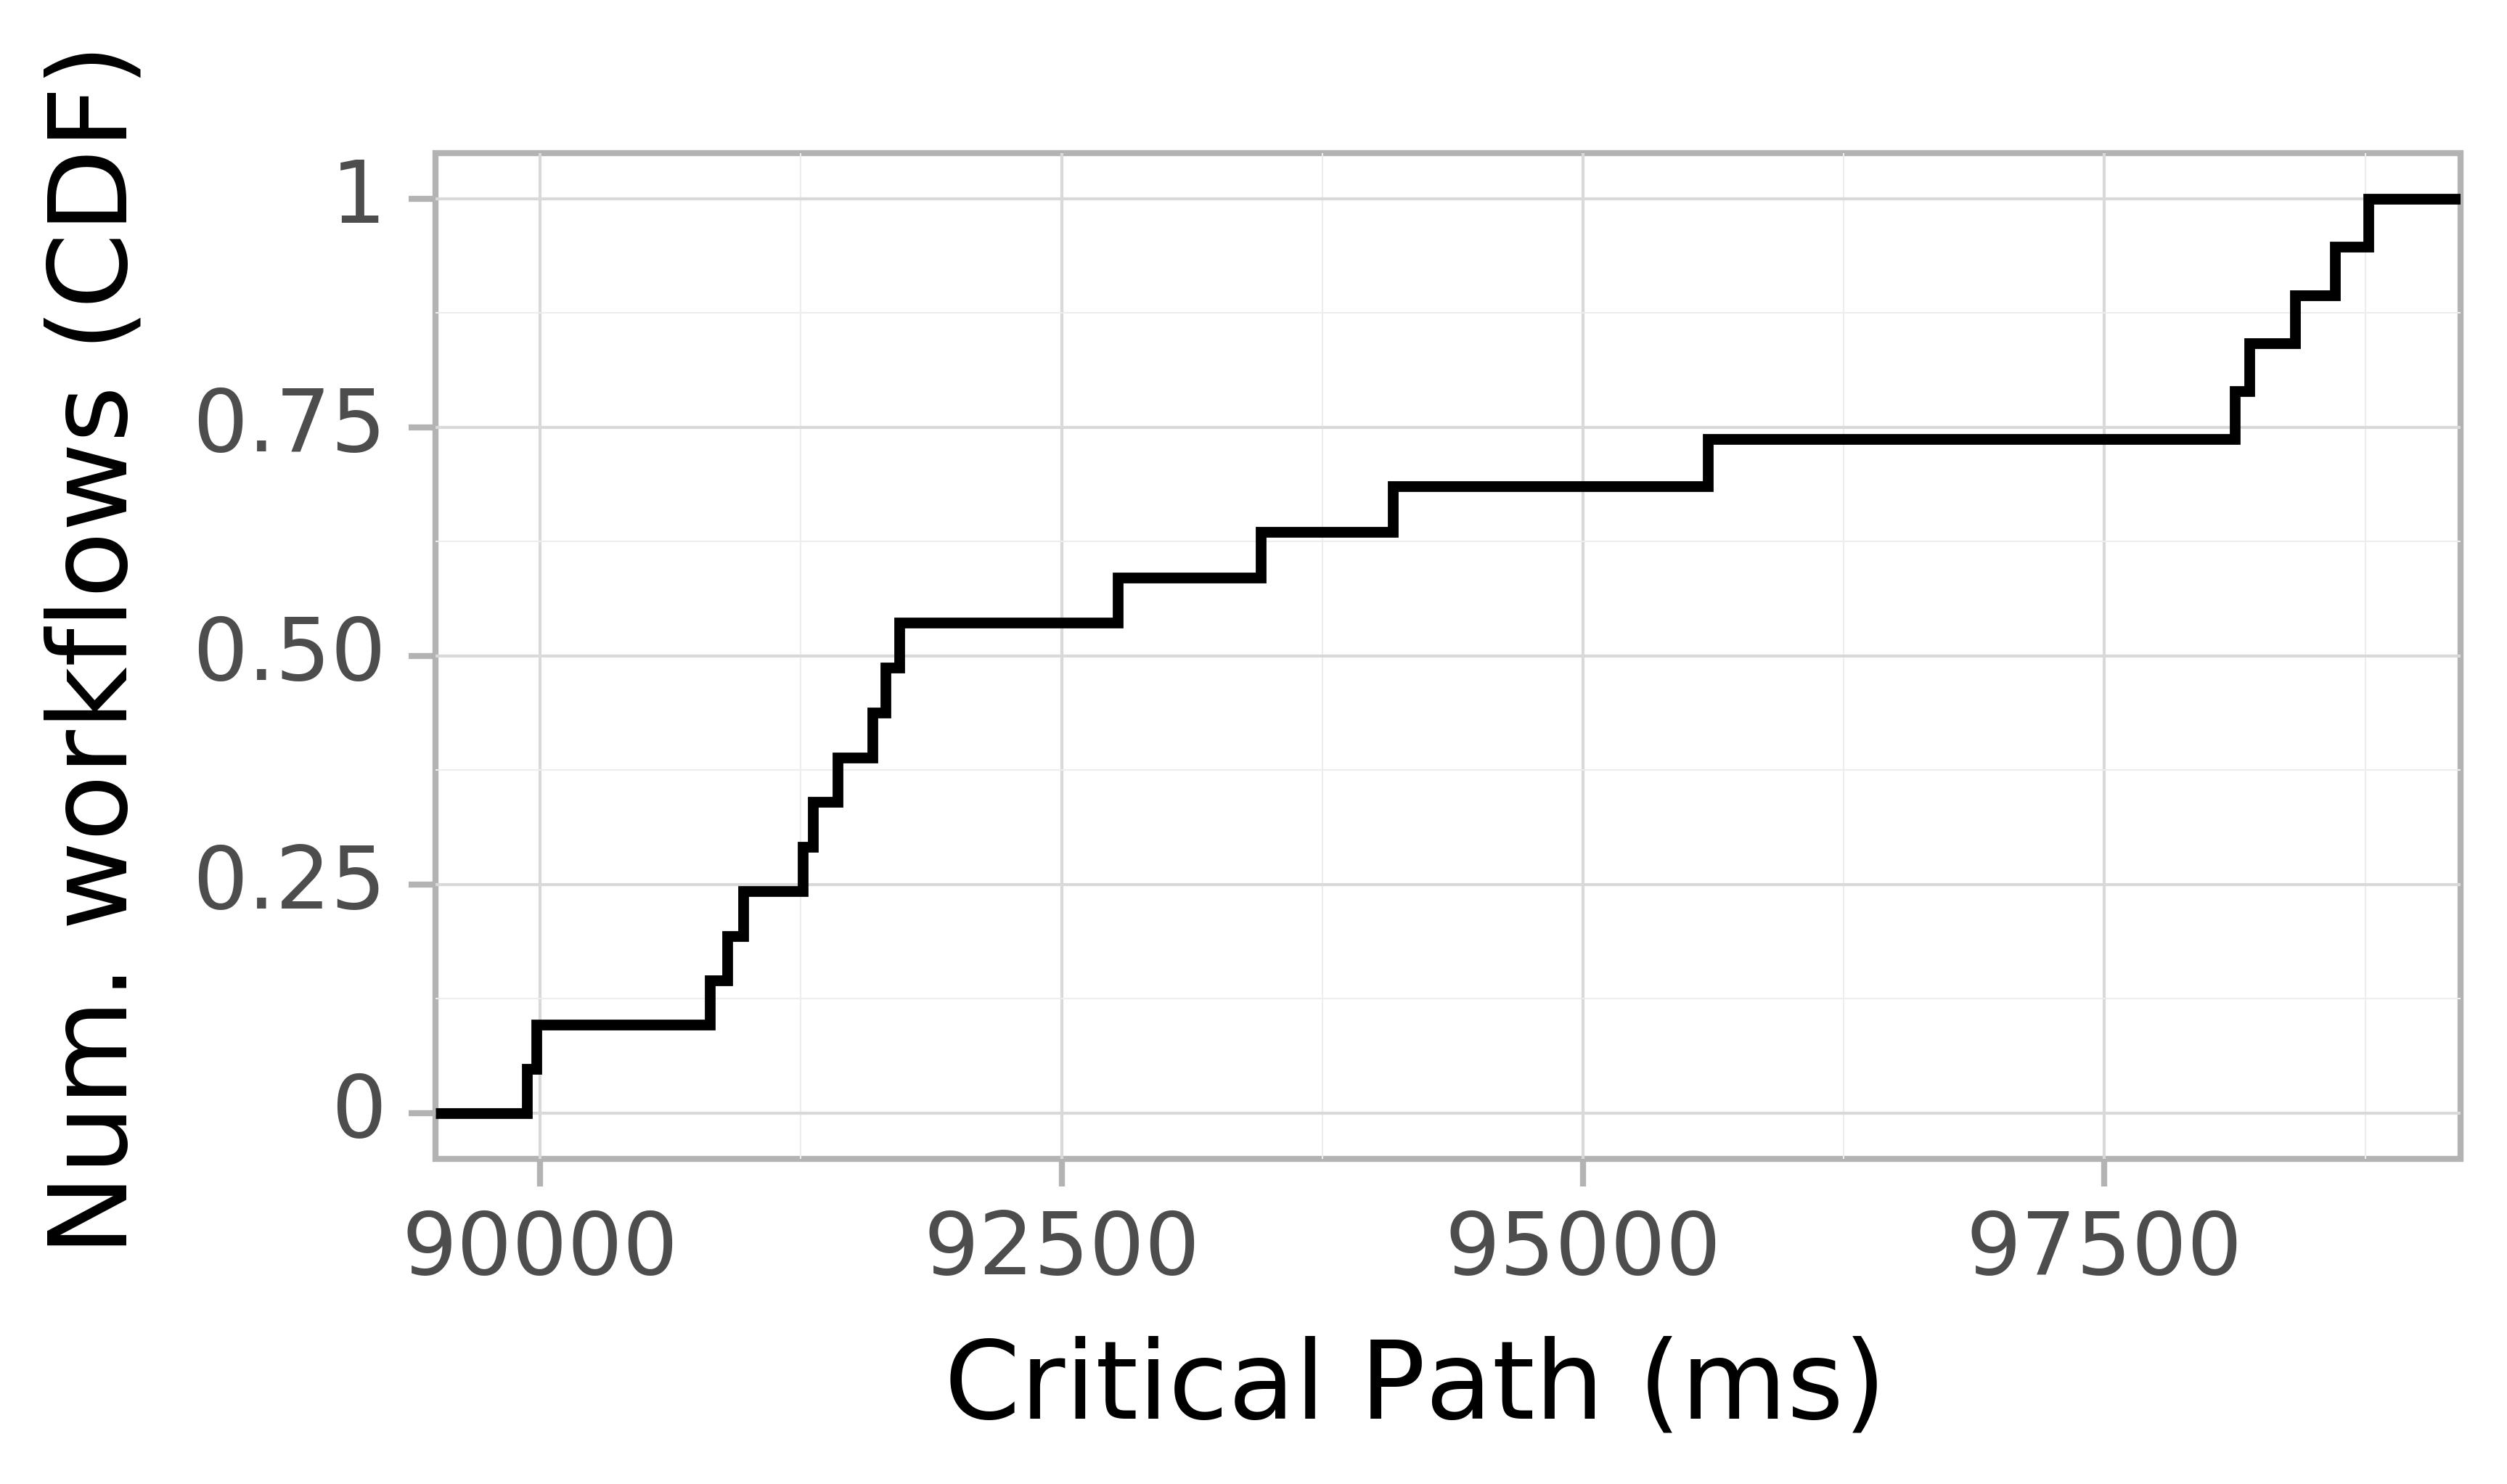 Job runtime CDF graph for the askalon-new_ee40 trace.